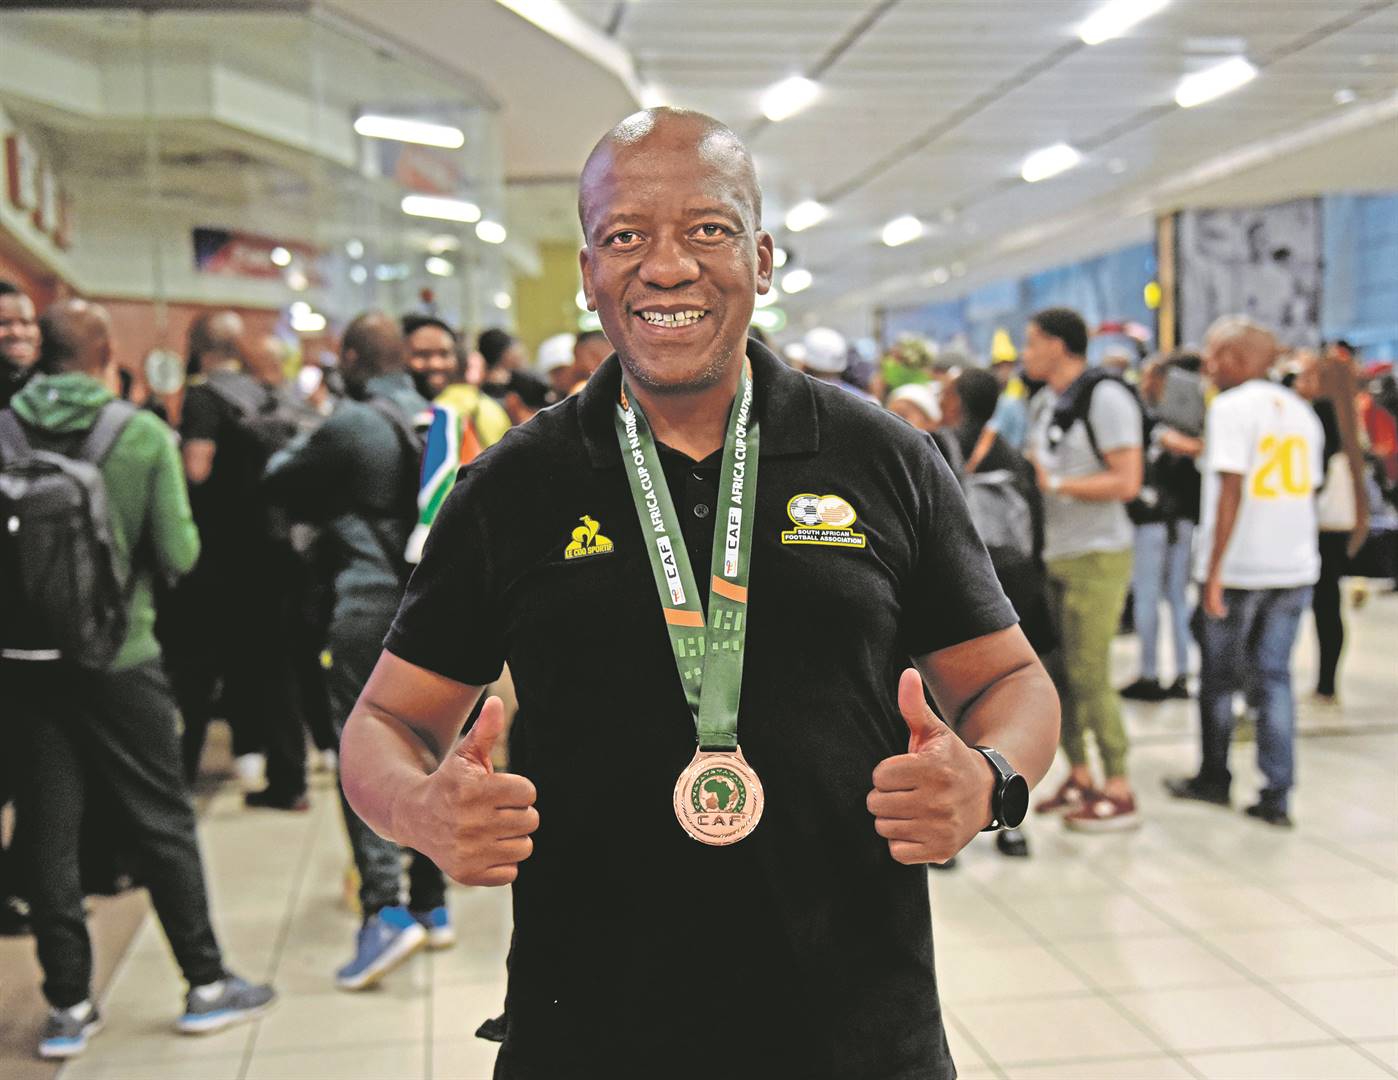 News24 | The man who turned Bafana into angels: How Tumelo Kujane gave Bafana a special touch